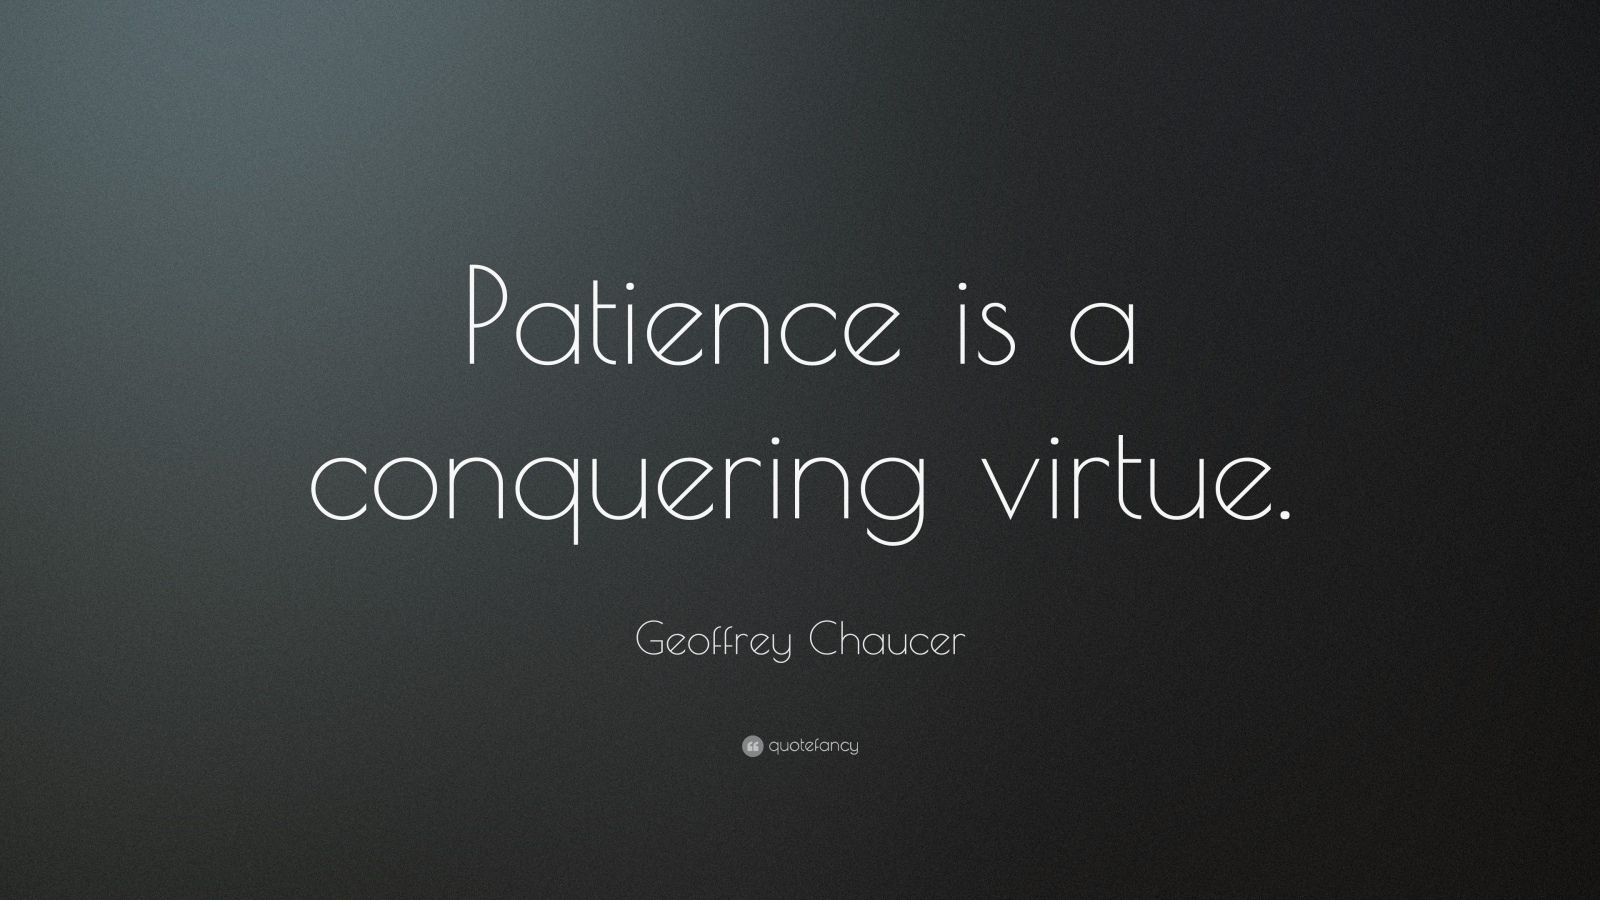 Geoffrey Chaucer Quote: “Patience is a conquering virtue.”